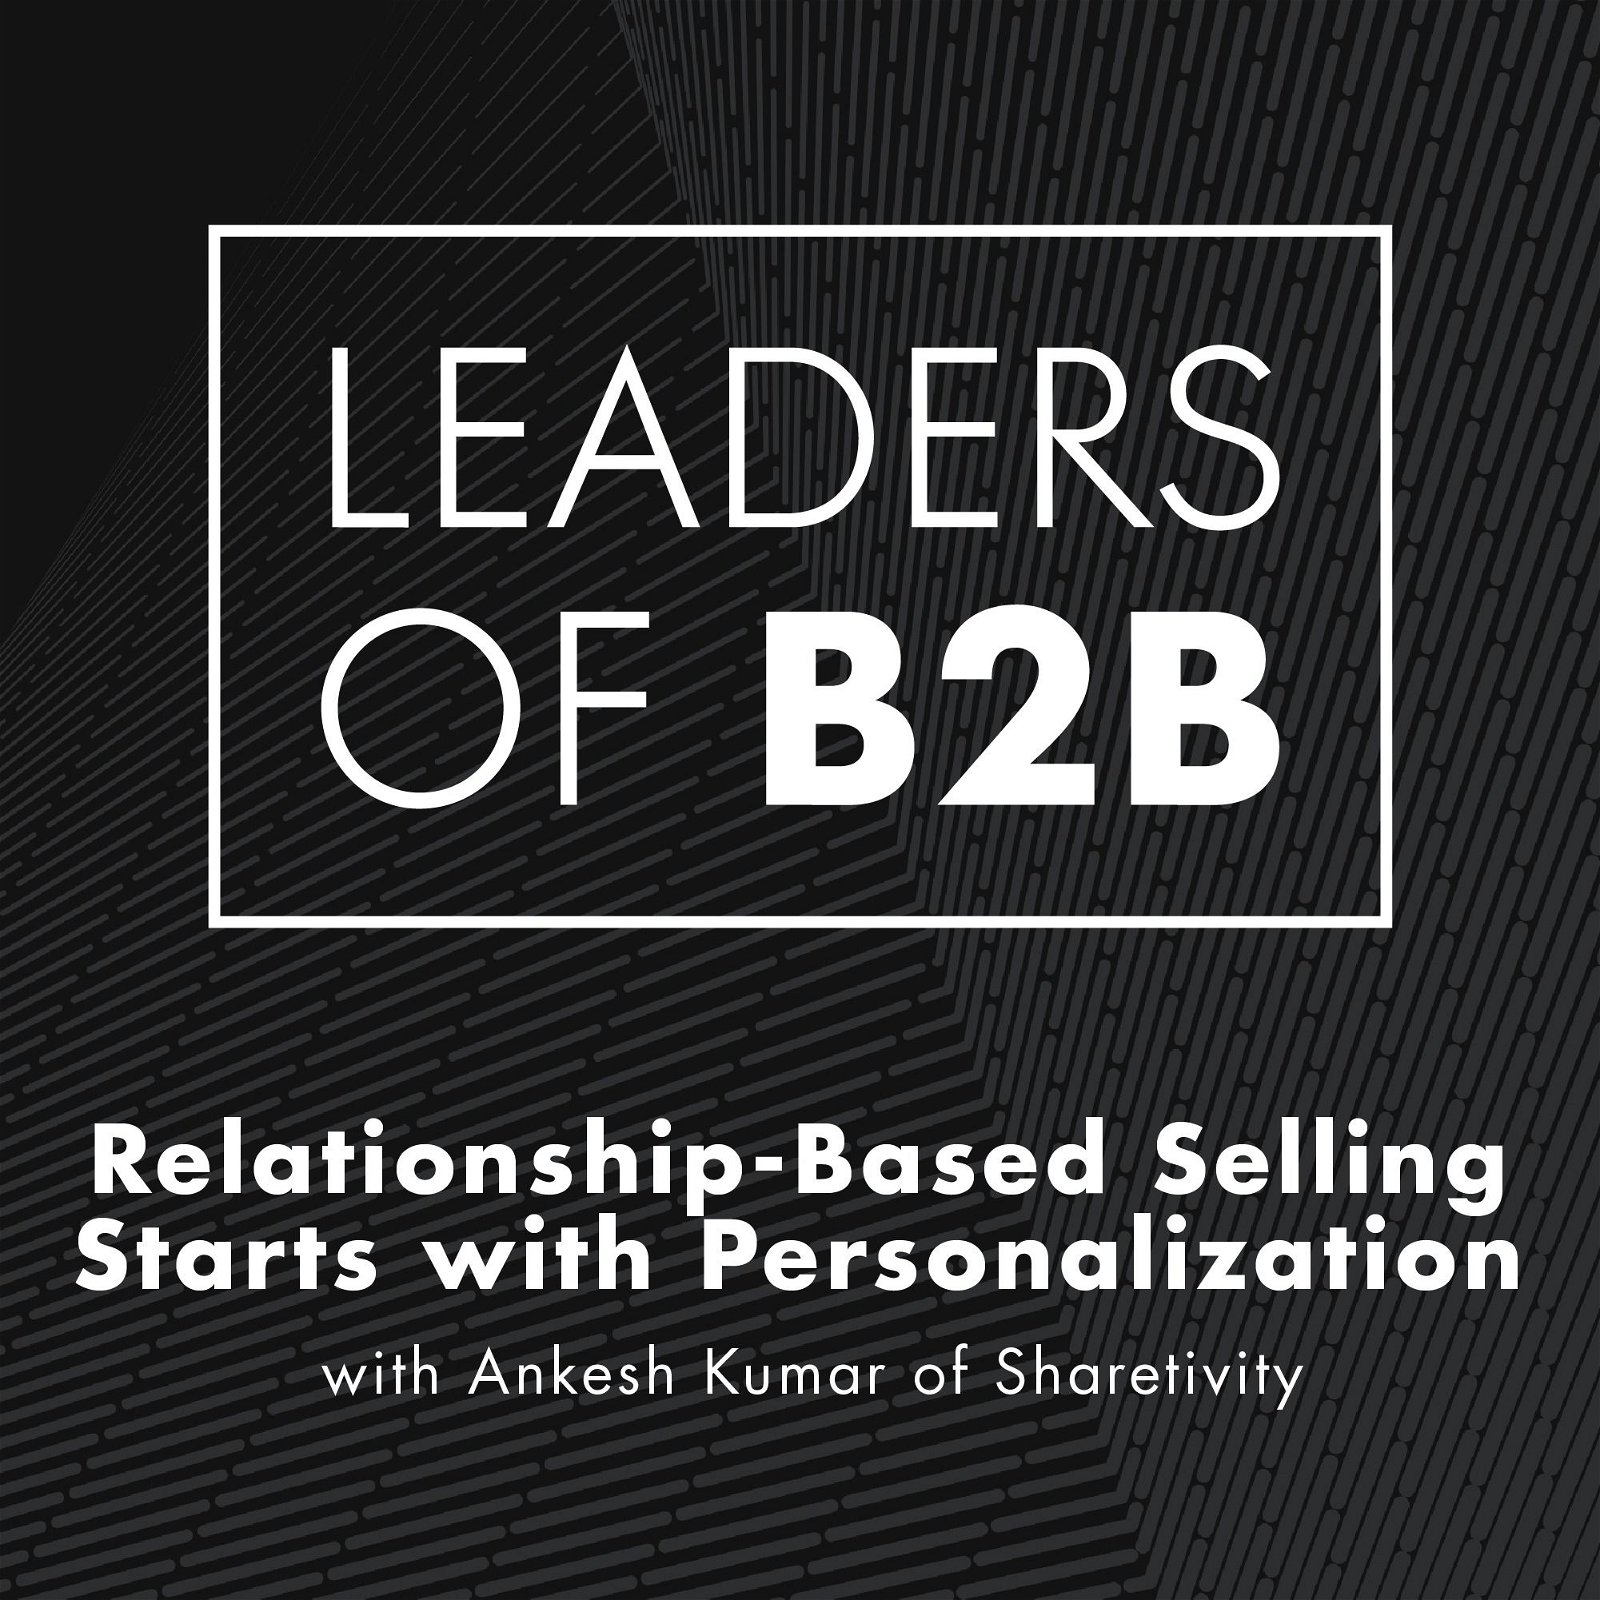 Relationship-based Selling Starts with Personalization, with Ankesh Kumar of Sharetivity